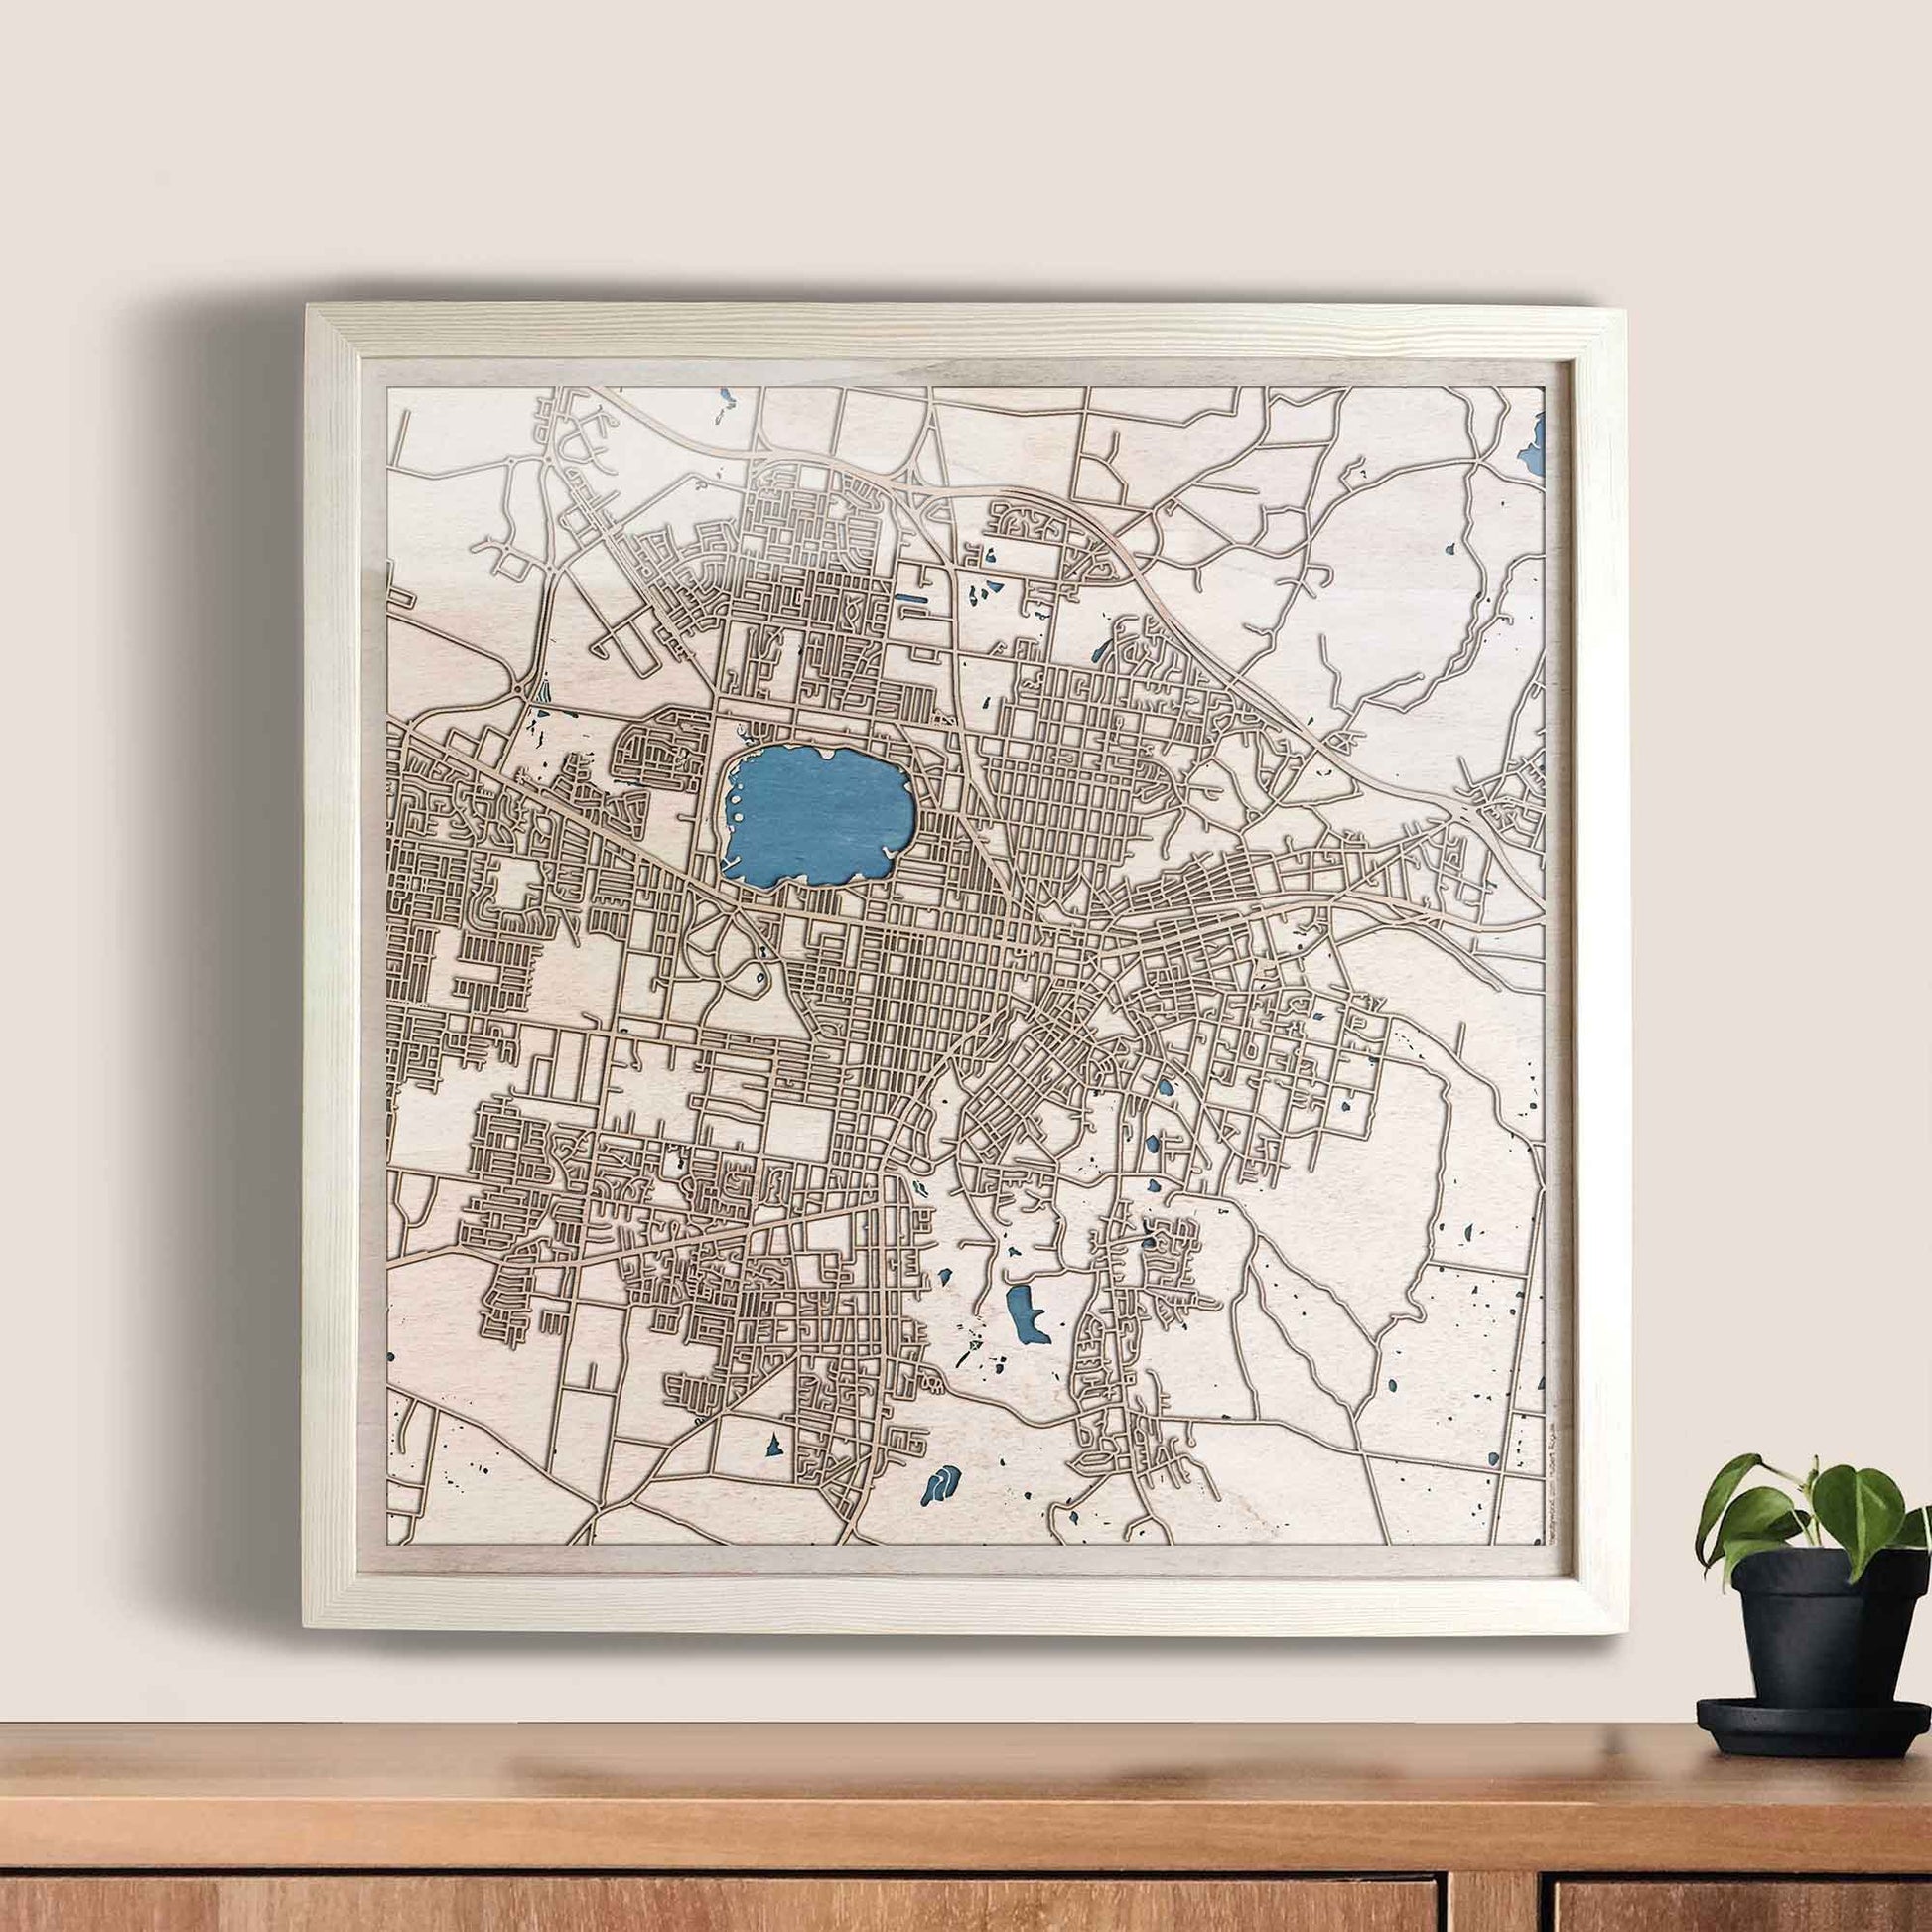 Ballarat Wooden Map by CityWood - Custom Wood Map Art - Unique Laser Cut Engraved - Anniversary Gift